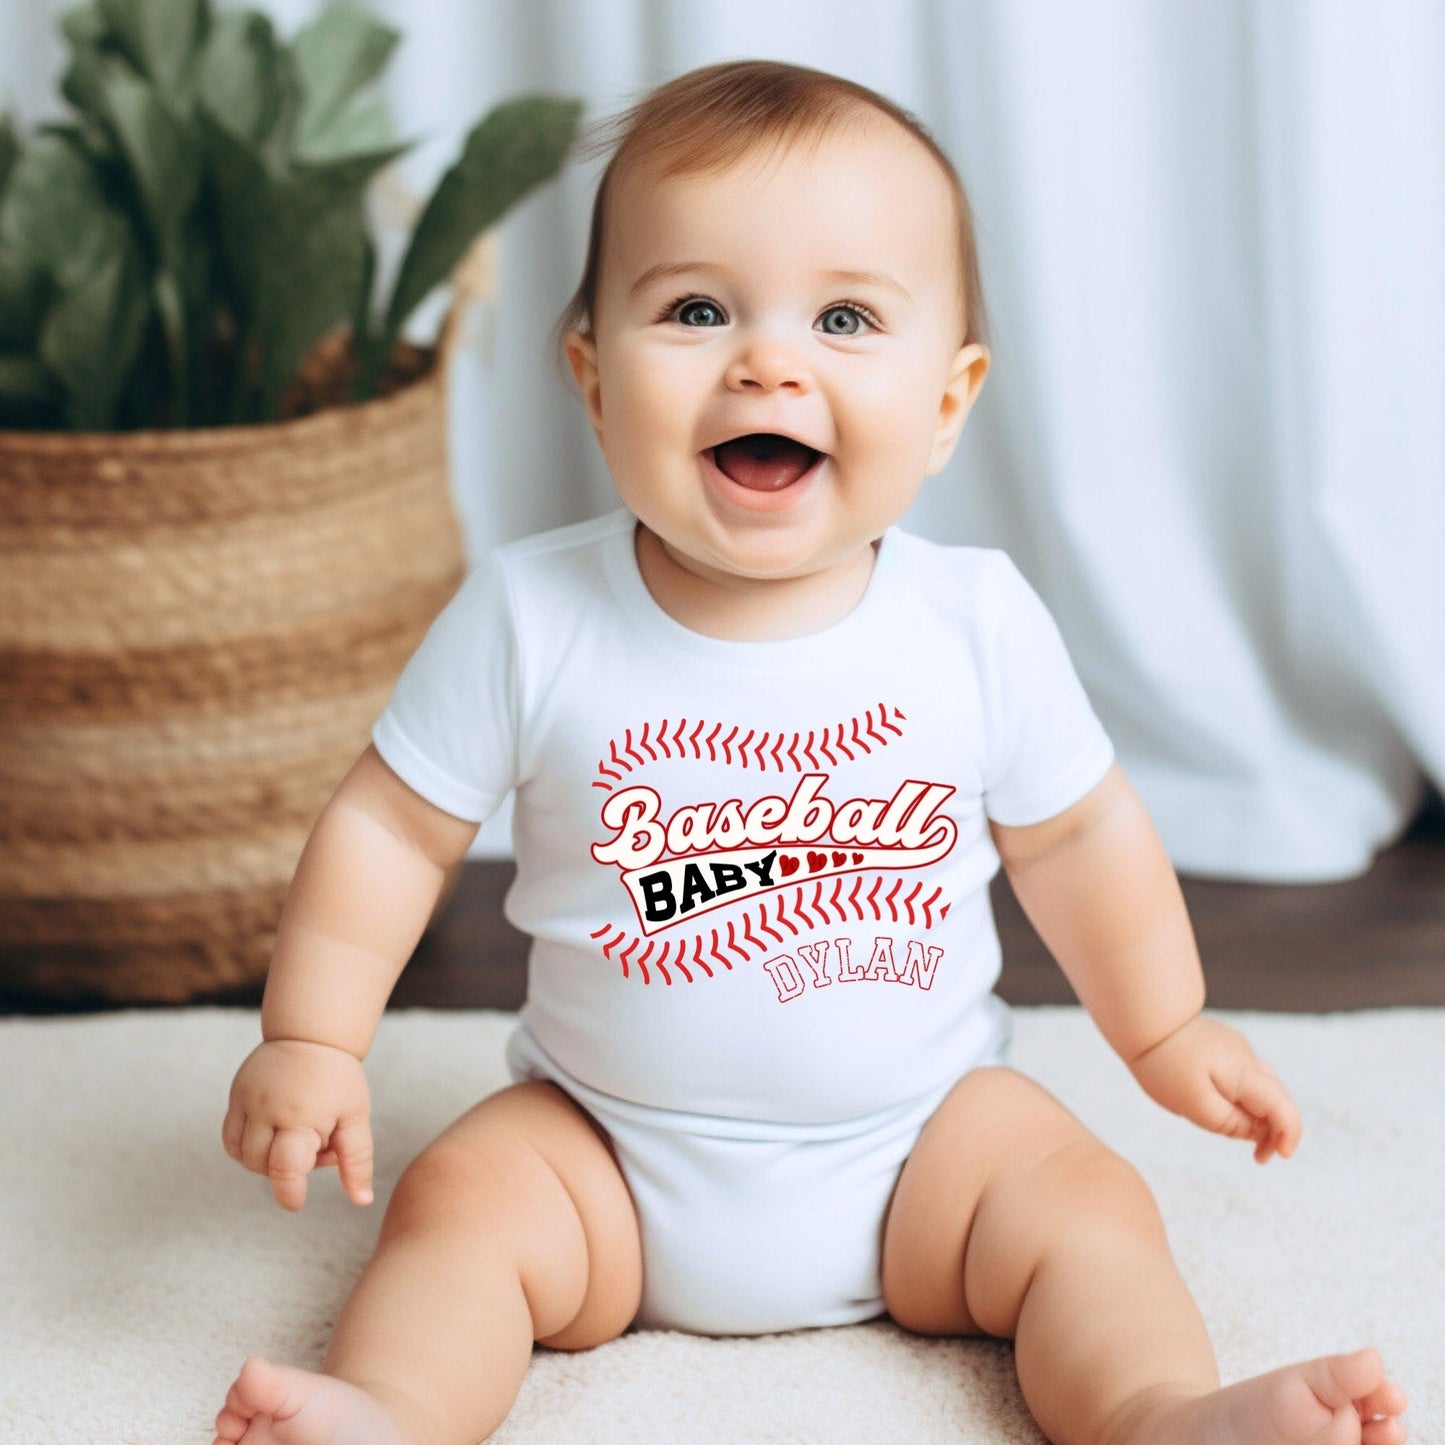 Personalized "Baseball Baby" Sports Romper